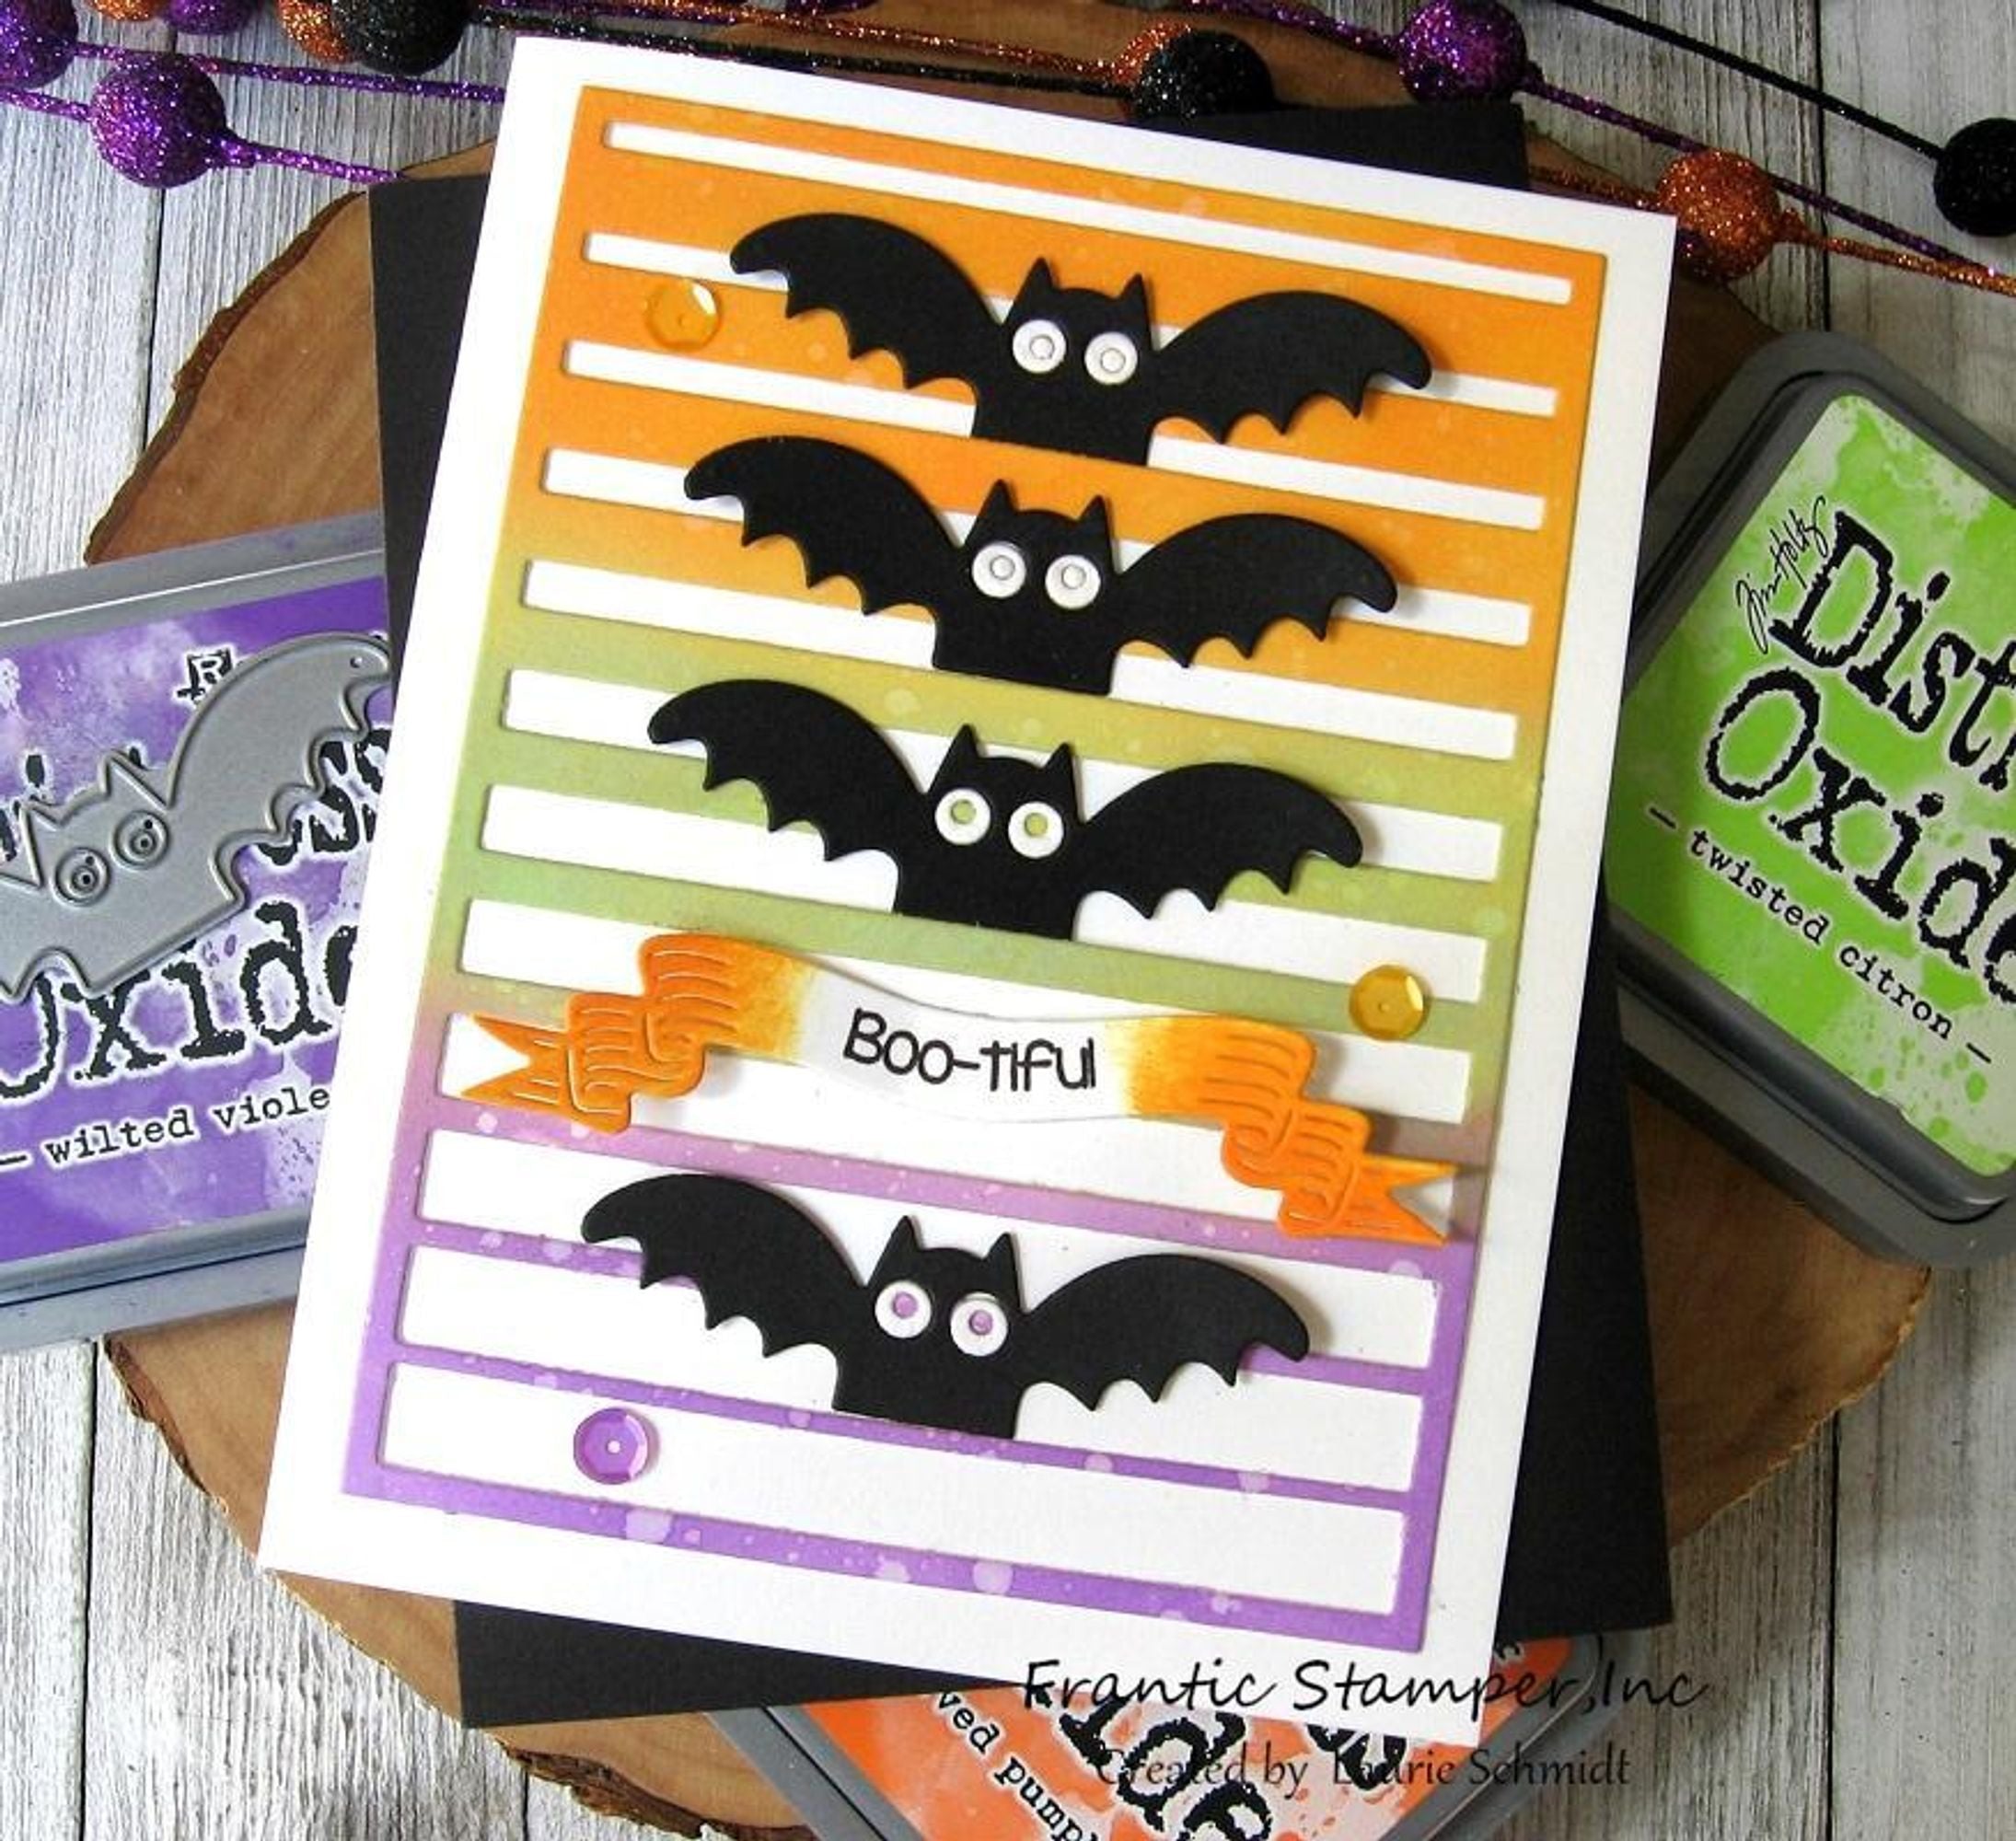 Frantic Stamper Precision Die - Cupcake and Halloween Toppers #1